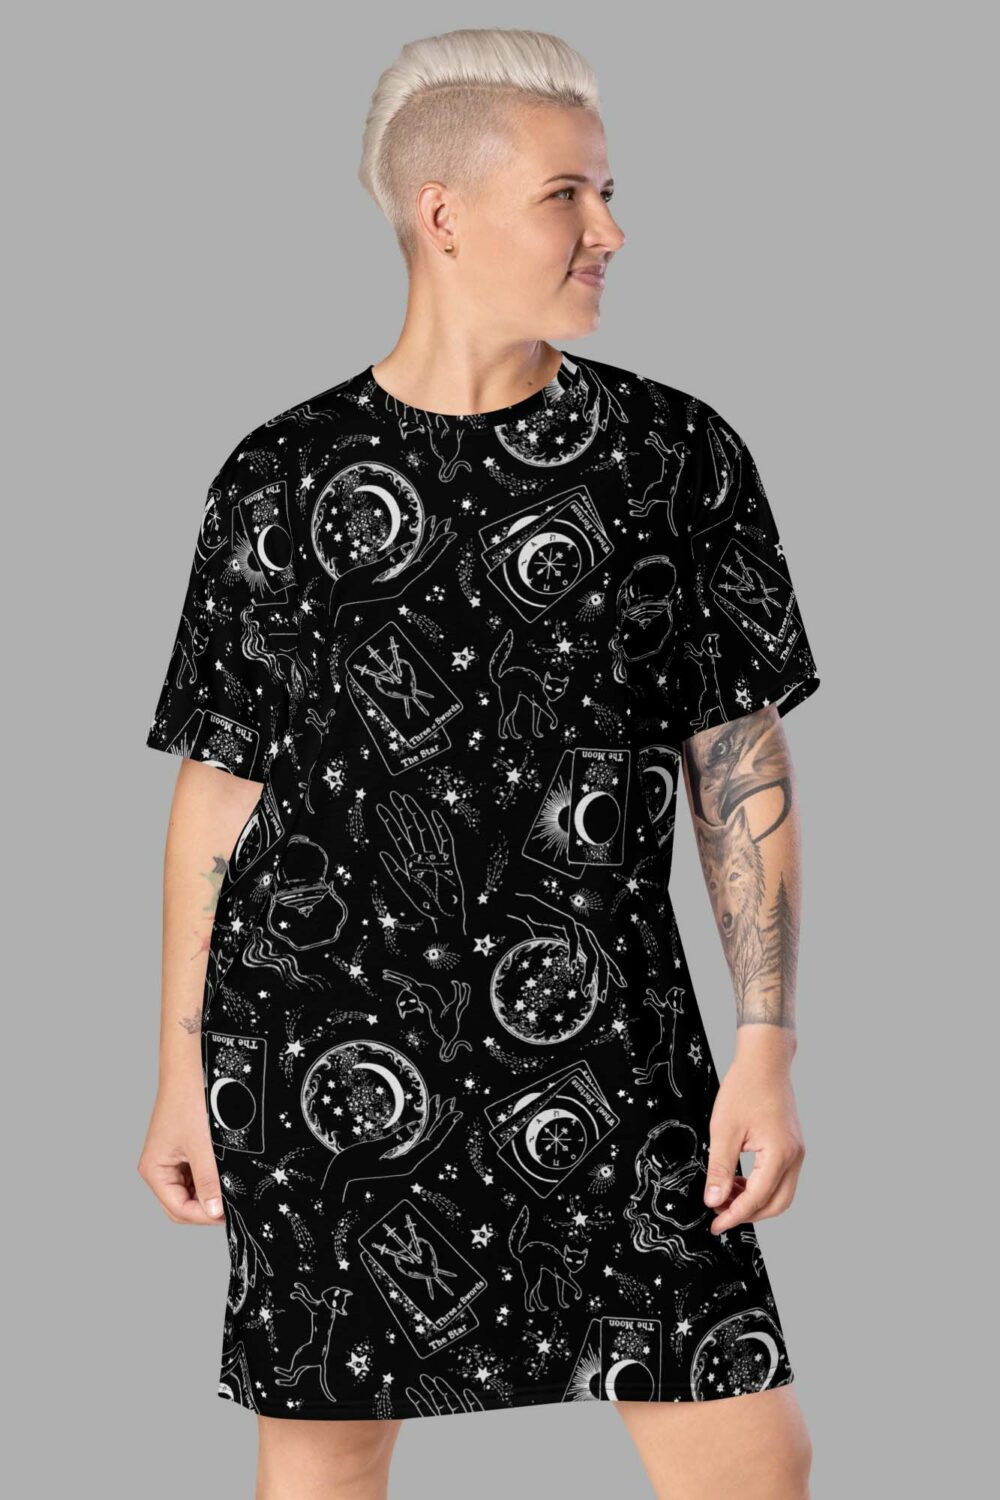 cosmic drifters travelling carnival print t shirt dress front